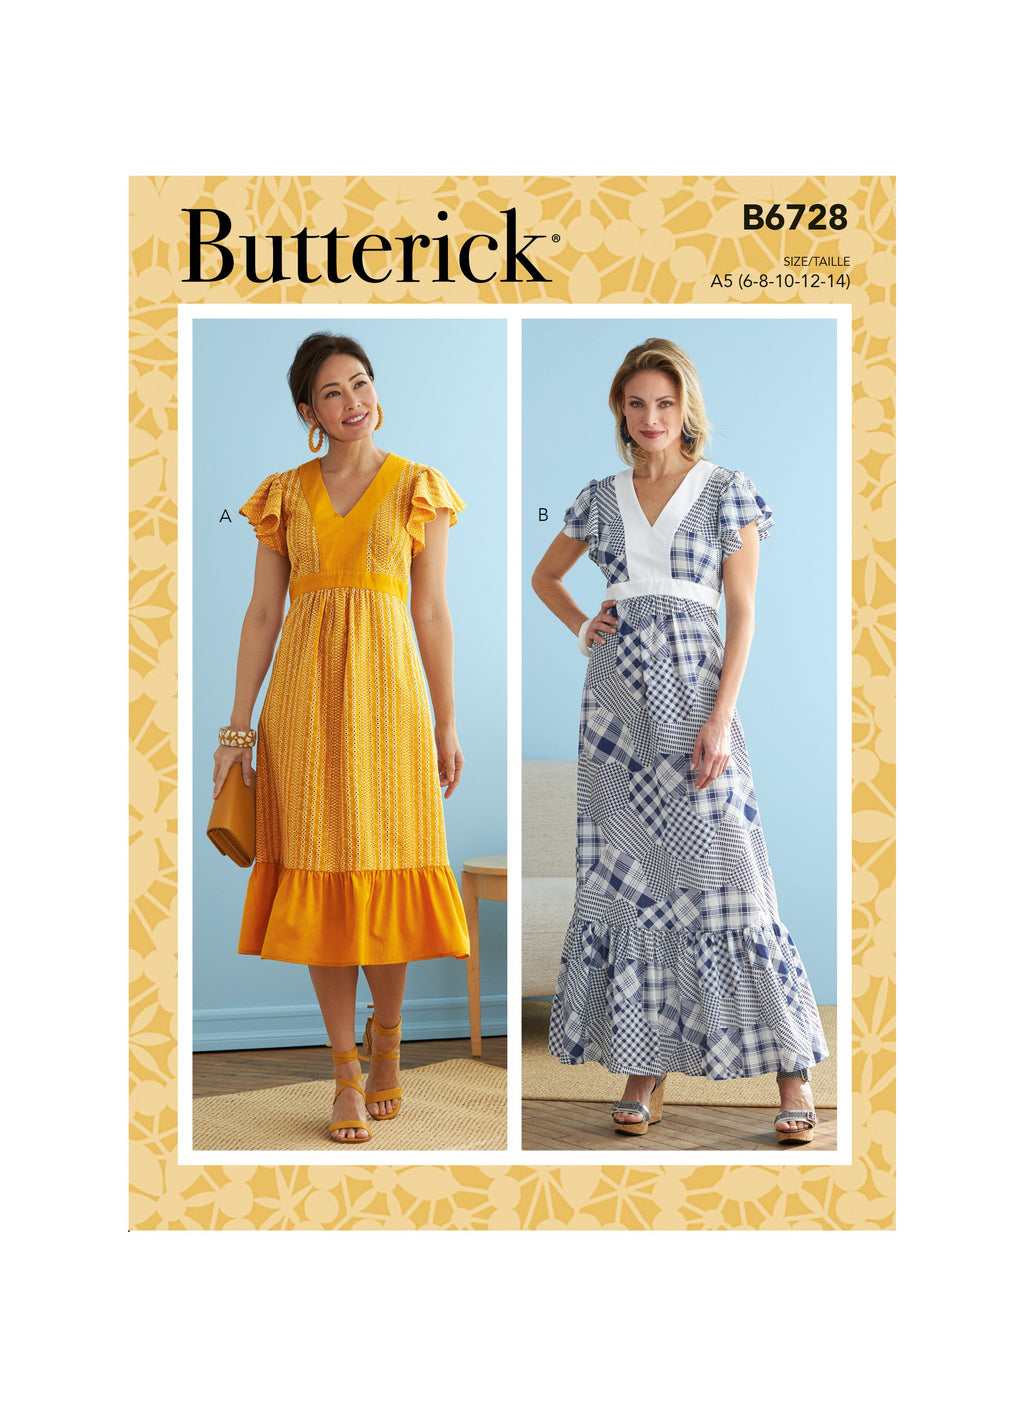 Butterick Sewing Pattern 6728 Misses' Dresses